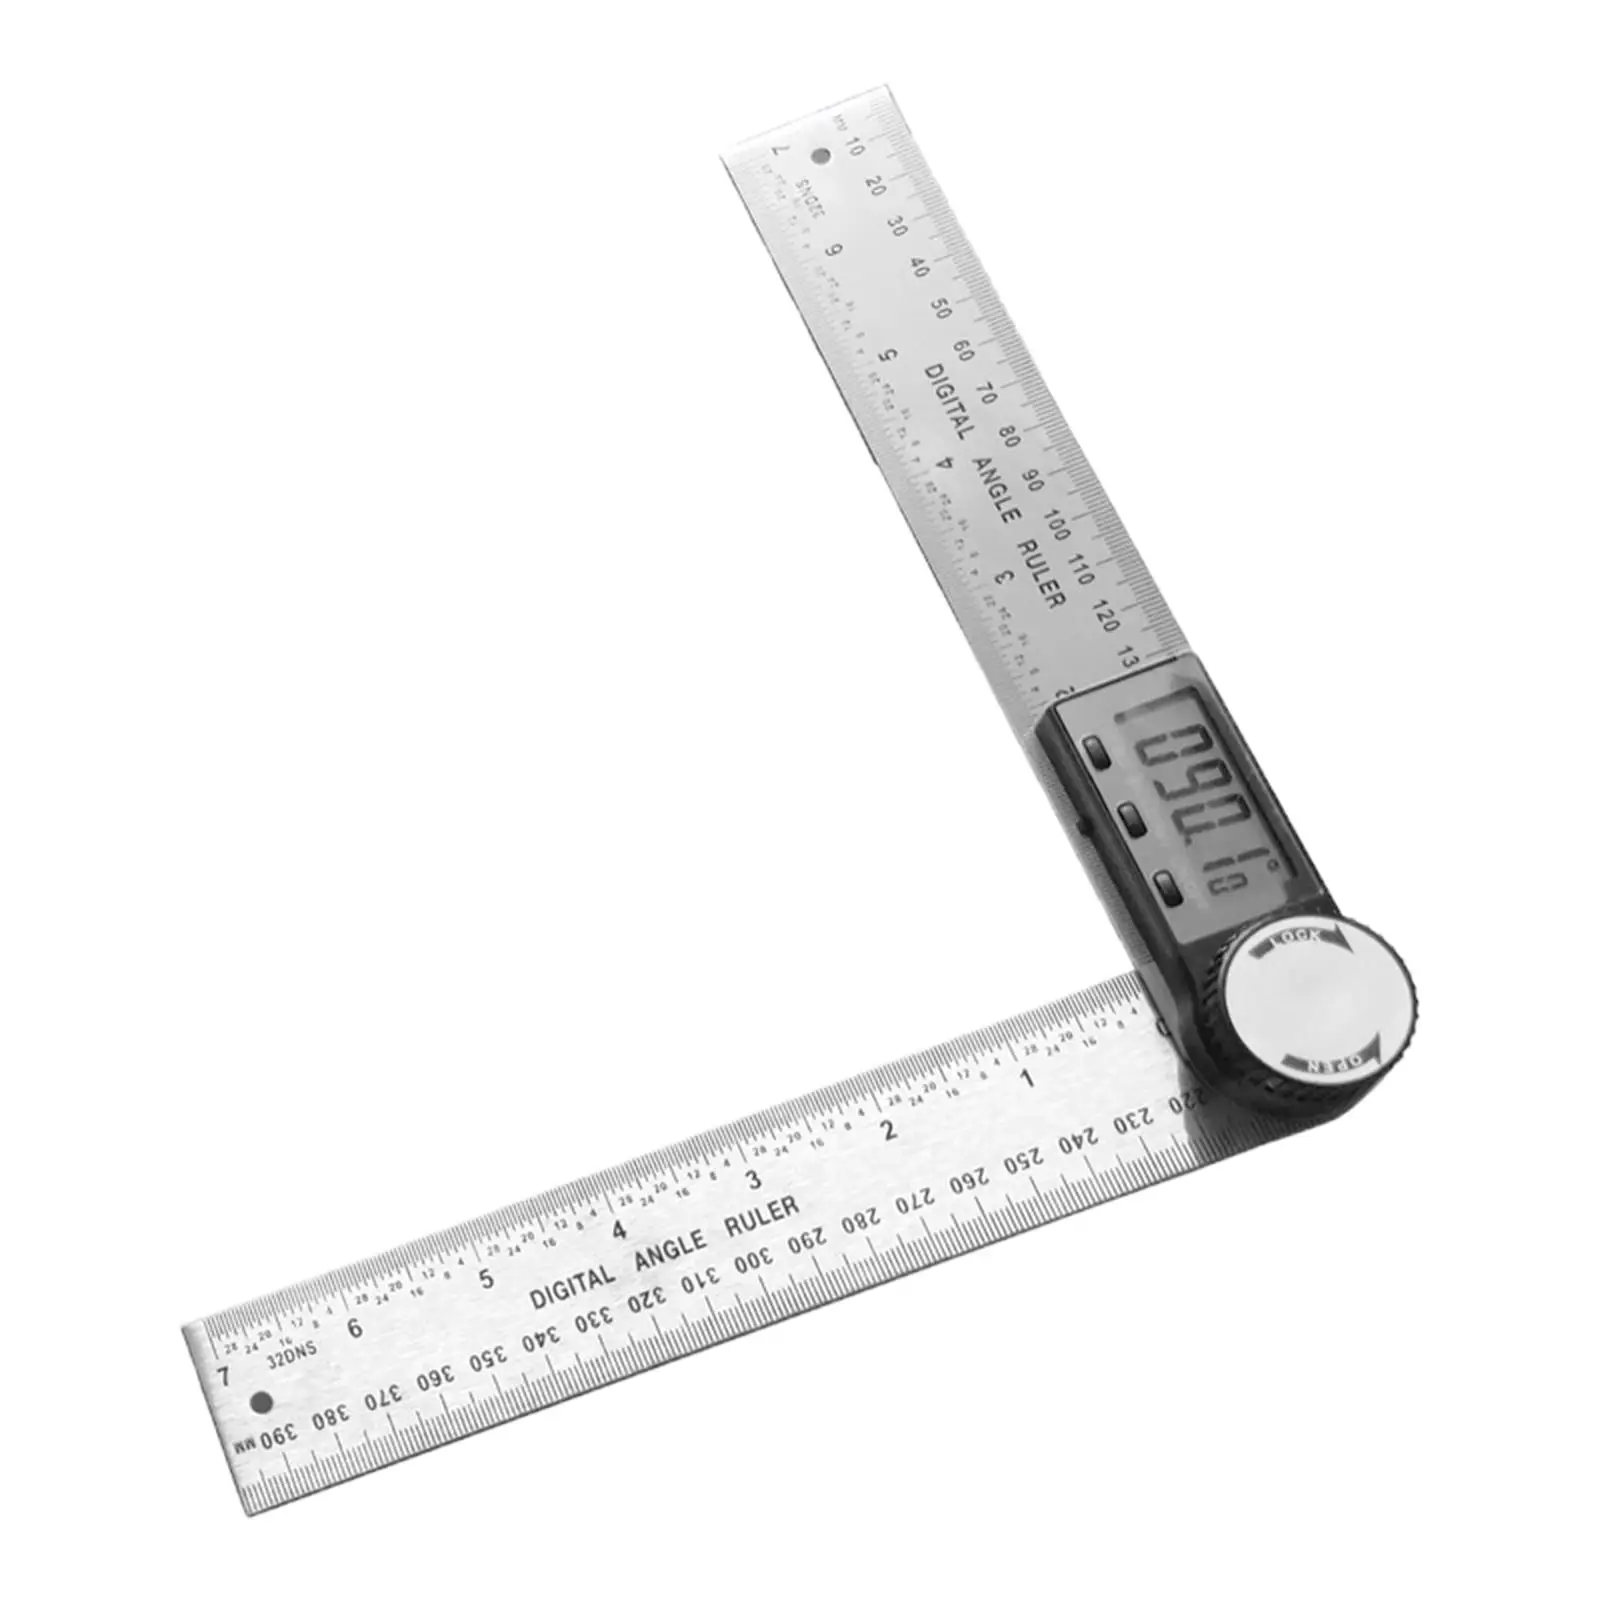 2 in 1 Ruler Digital Angle Finders Woodworking Tools with LCD Display Digital Angle Ruler